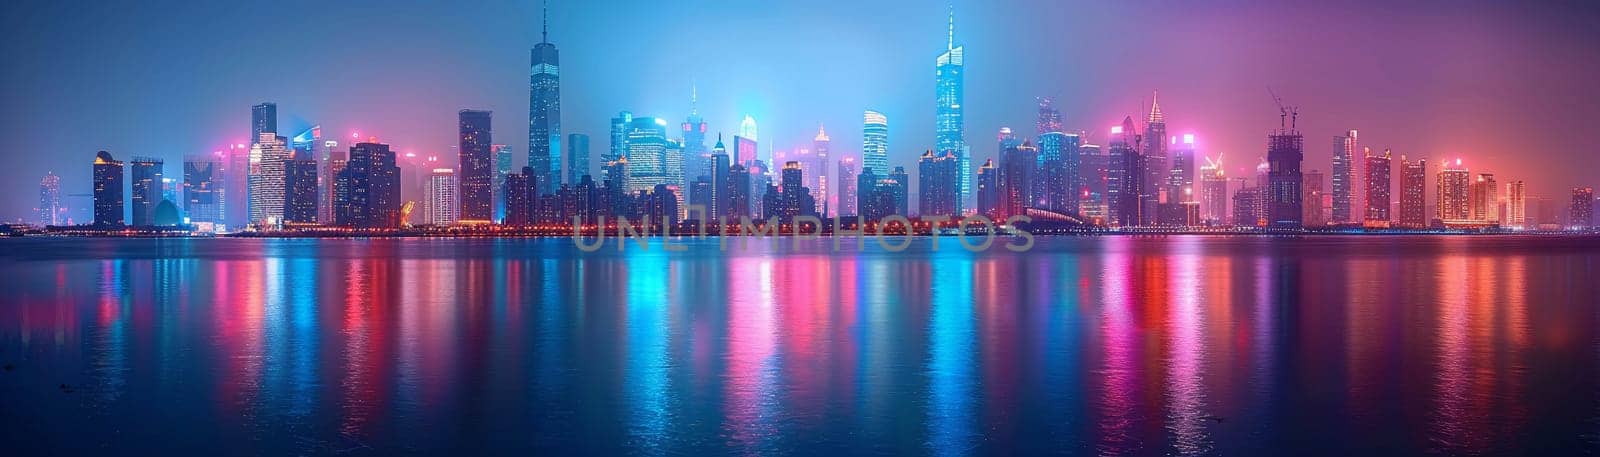 Illuminated city skyline at night, suitable for urban and dynamic design projects.